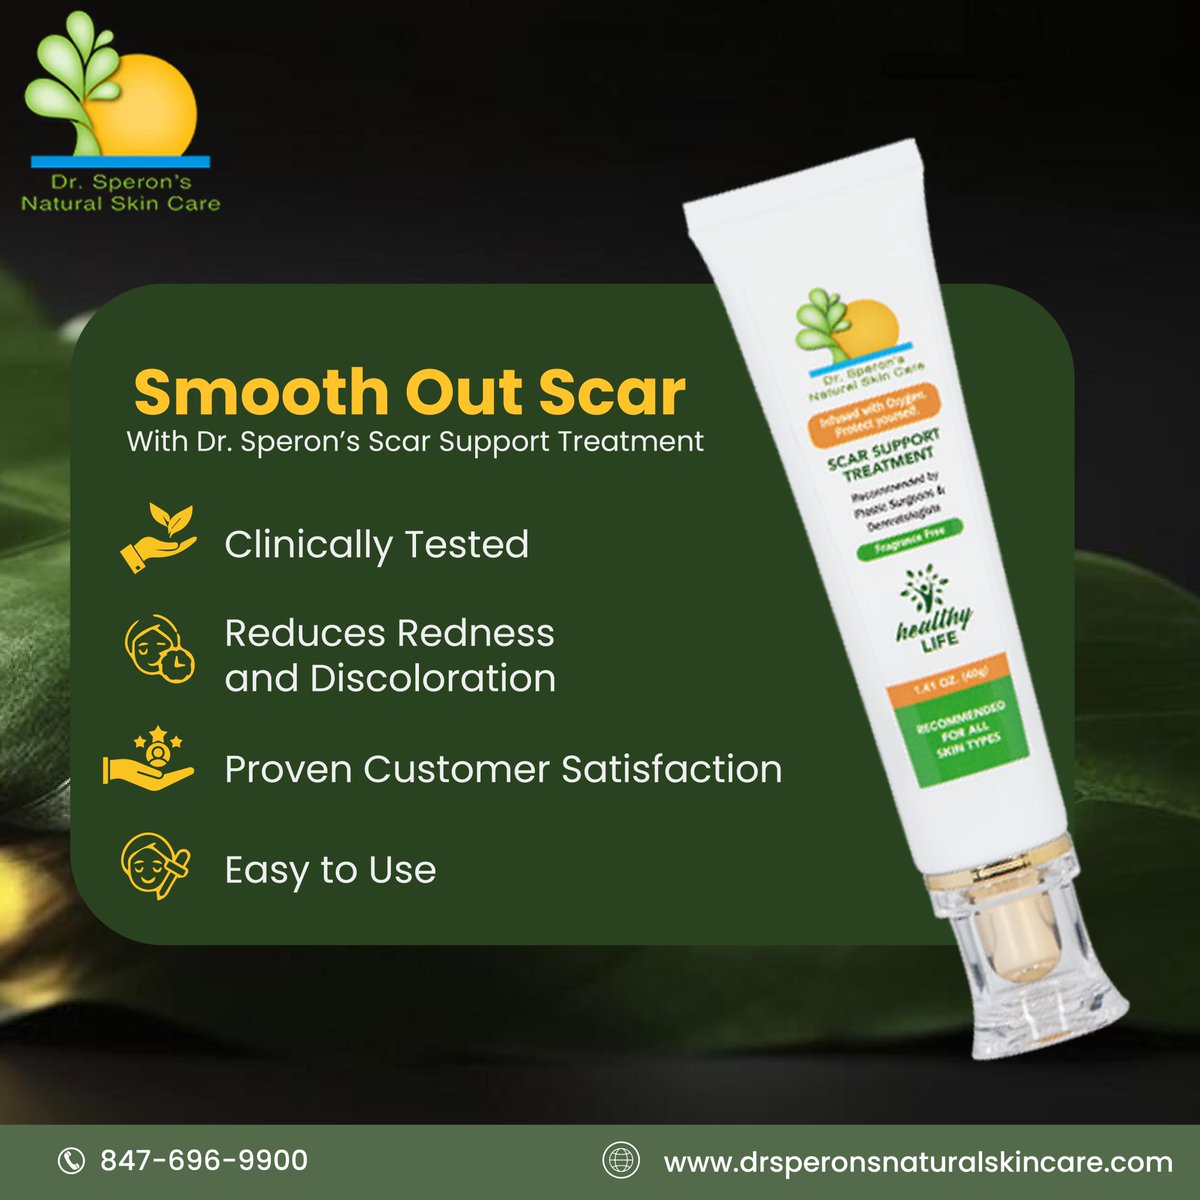 Smooth Out Your Scars 🙋‍♀️
with
Dr. Speron's Scar Support Treatment Cream 💯
Shop Now 🛒 and Get Scar-less Appearance 💯
bit.ly/3J4cVNw

#ScarCare #AdvancedSkincare #MedicalResearch #ScarTreatment #BeautyInnovation #ScarSupport #SkinHealing #AcneScar #BurnScar #InjuryScar